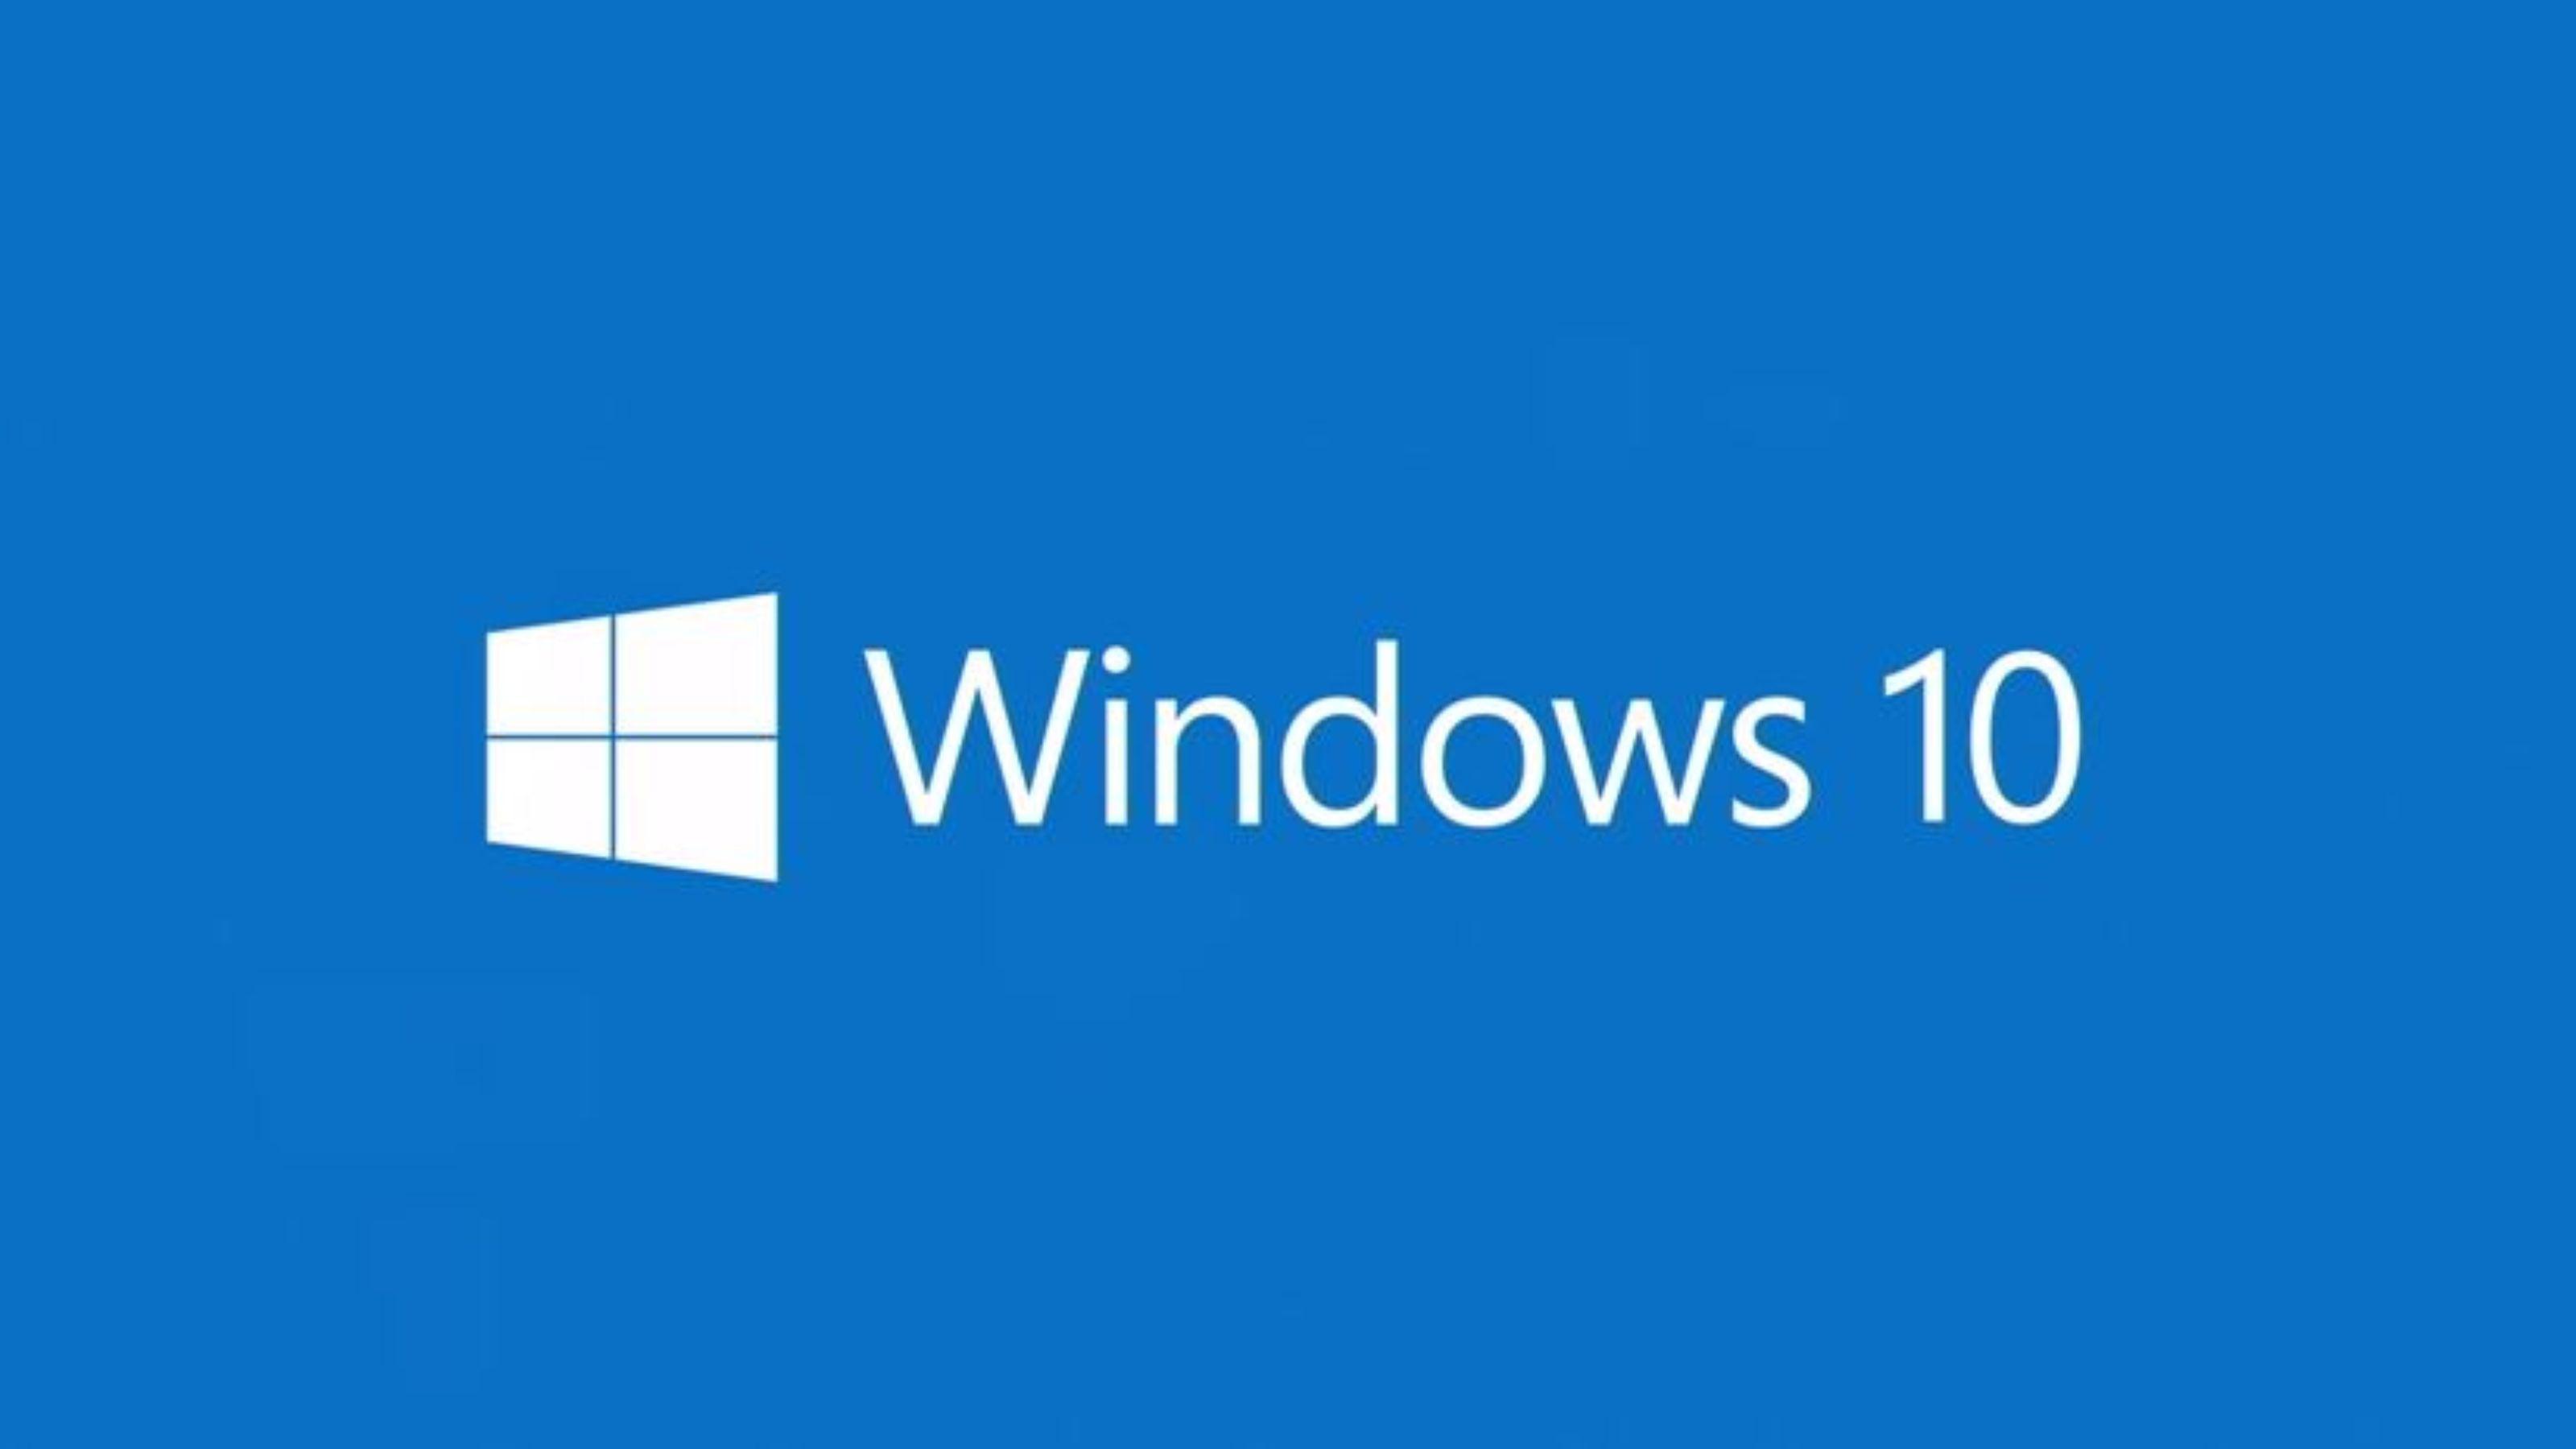 Microsoft Consumers Paid Windows 10 Support - Silicon UK